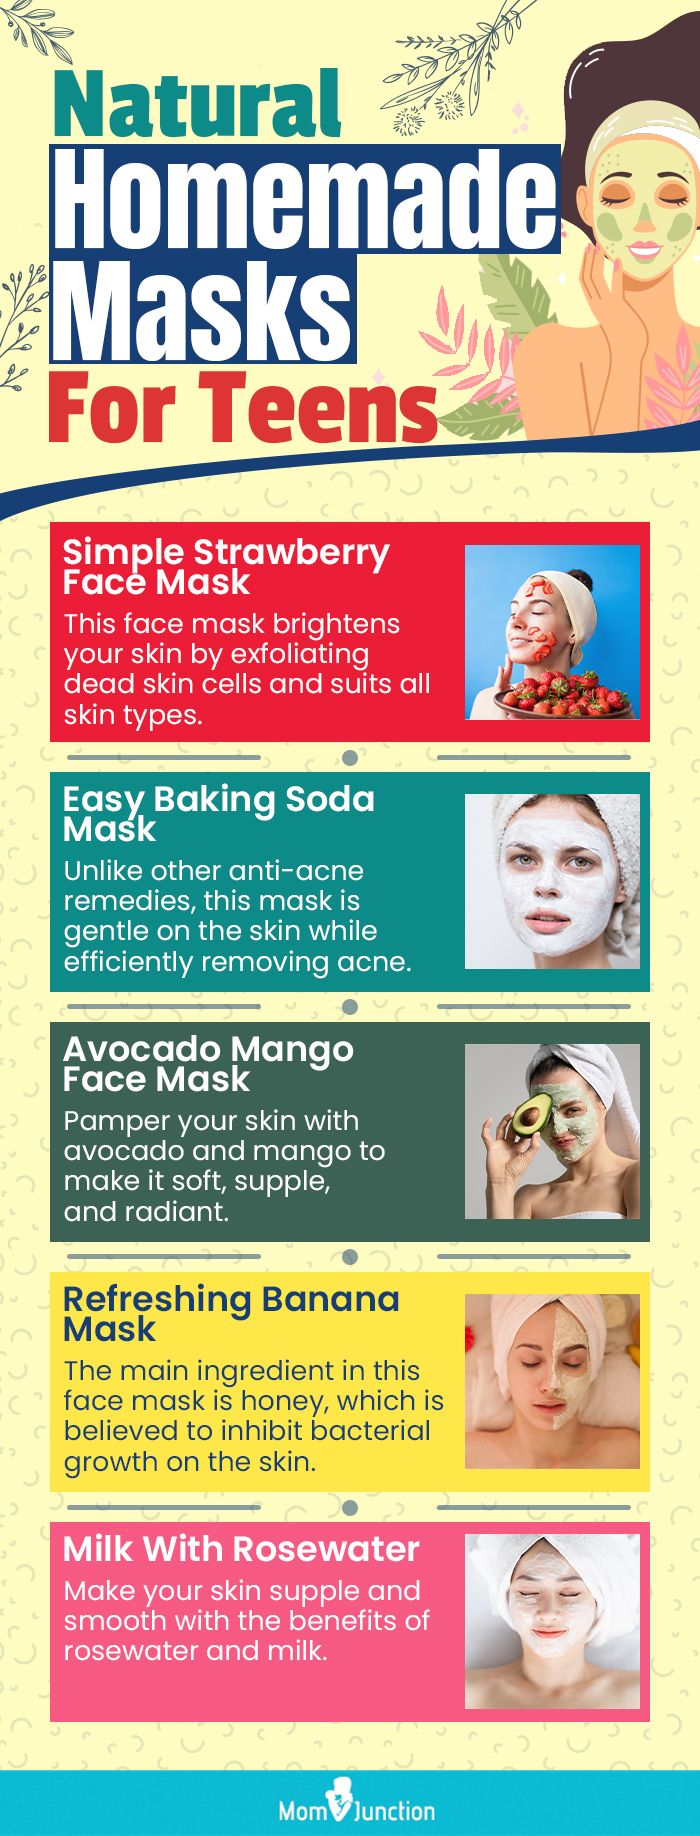 natural homemade masks for teens (infographic)